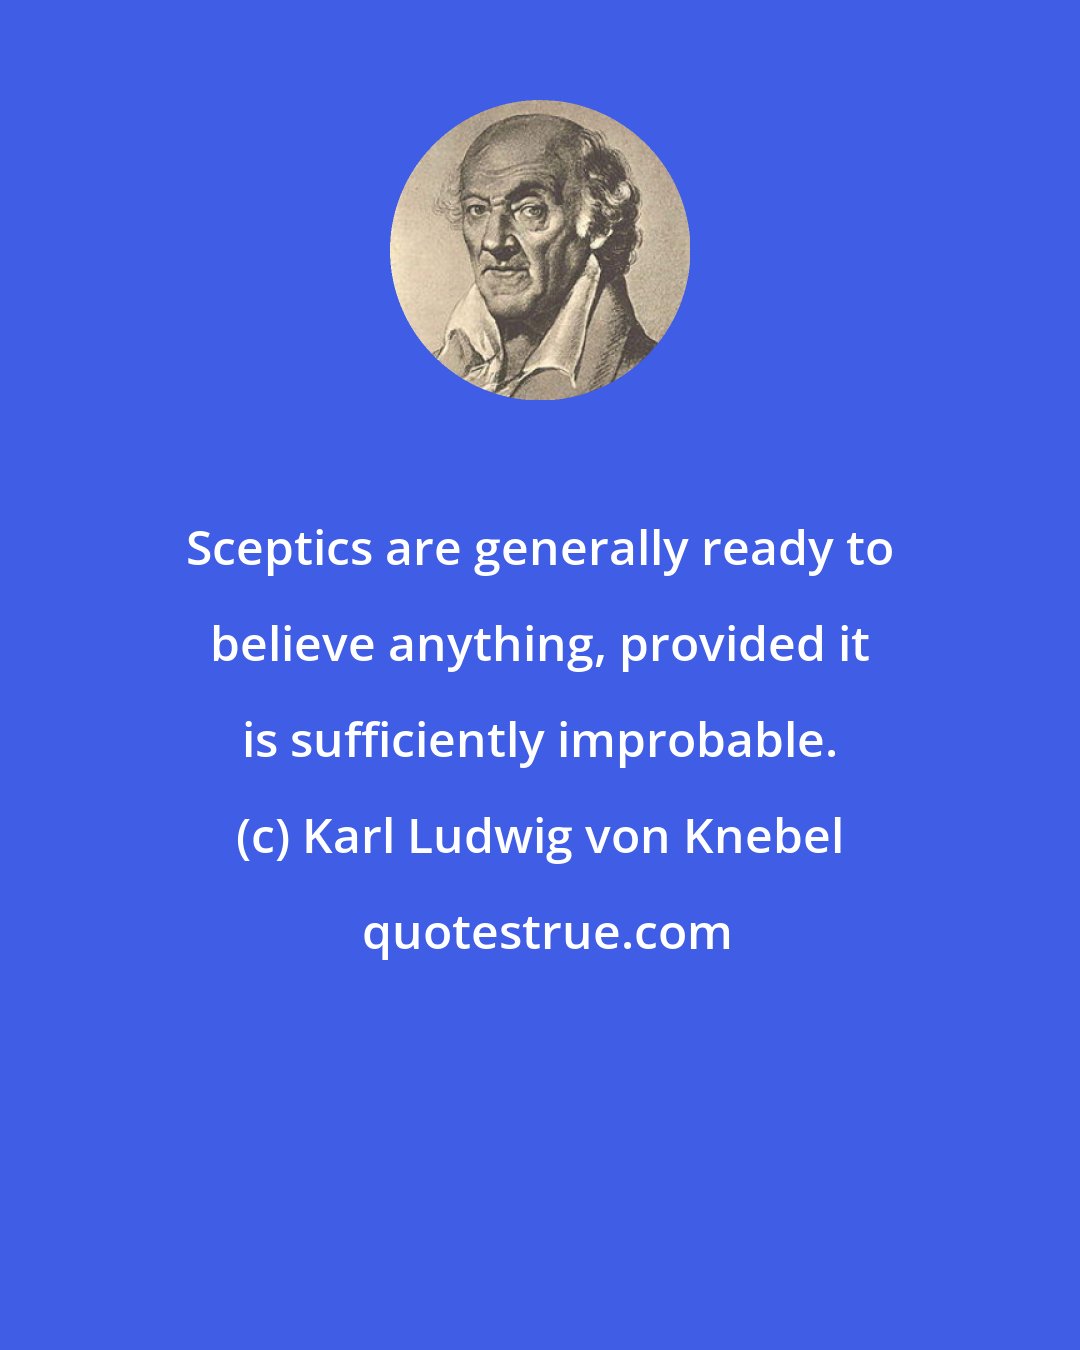 Karl Ludwig von Knebel: Sceptics are generally ready to believe anything, provided it is sufficiently improbable.